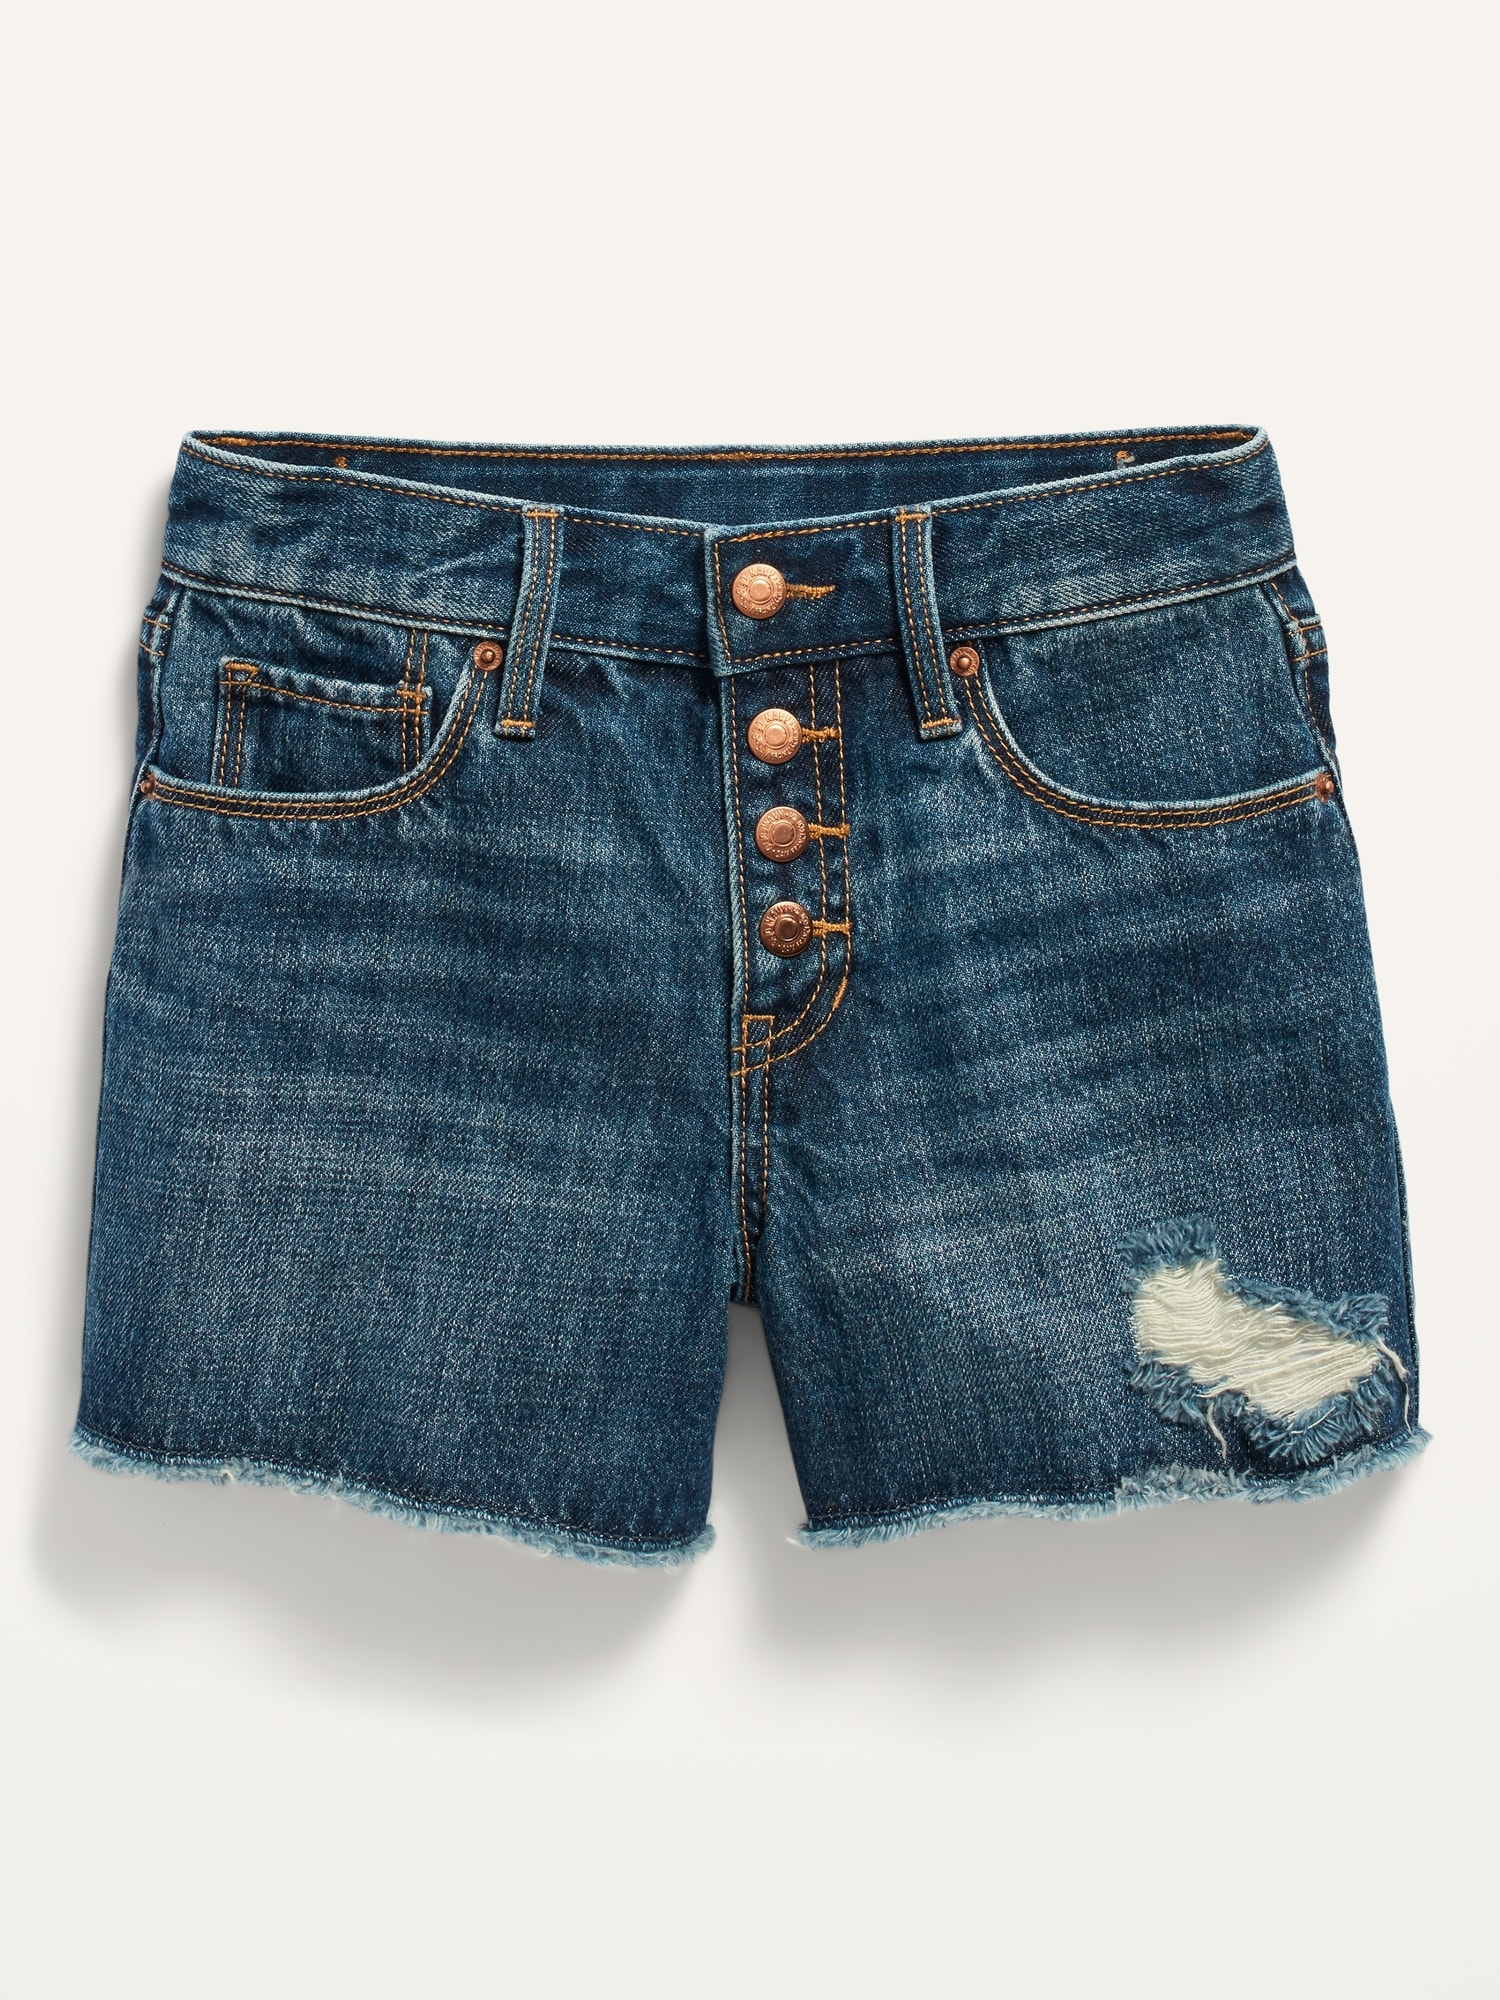 Extra High-Waisted Dark-Wash Distressed Cut-Off Jean Shorts for Girls